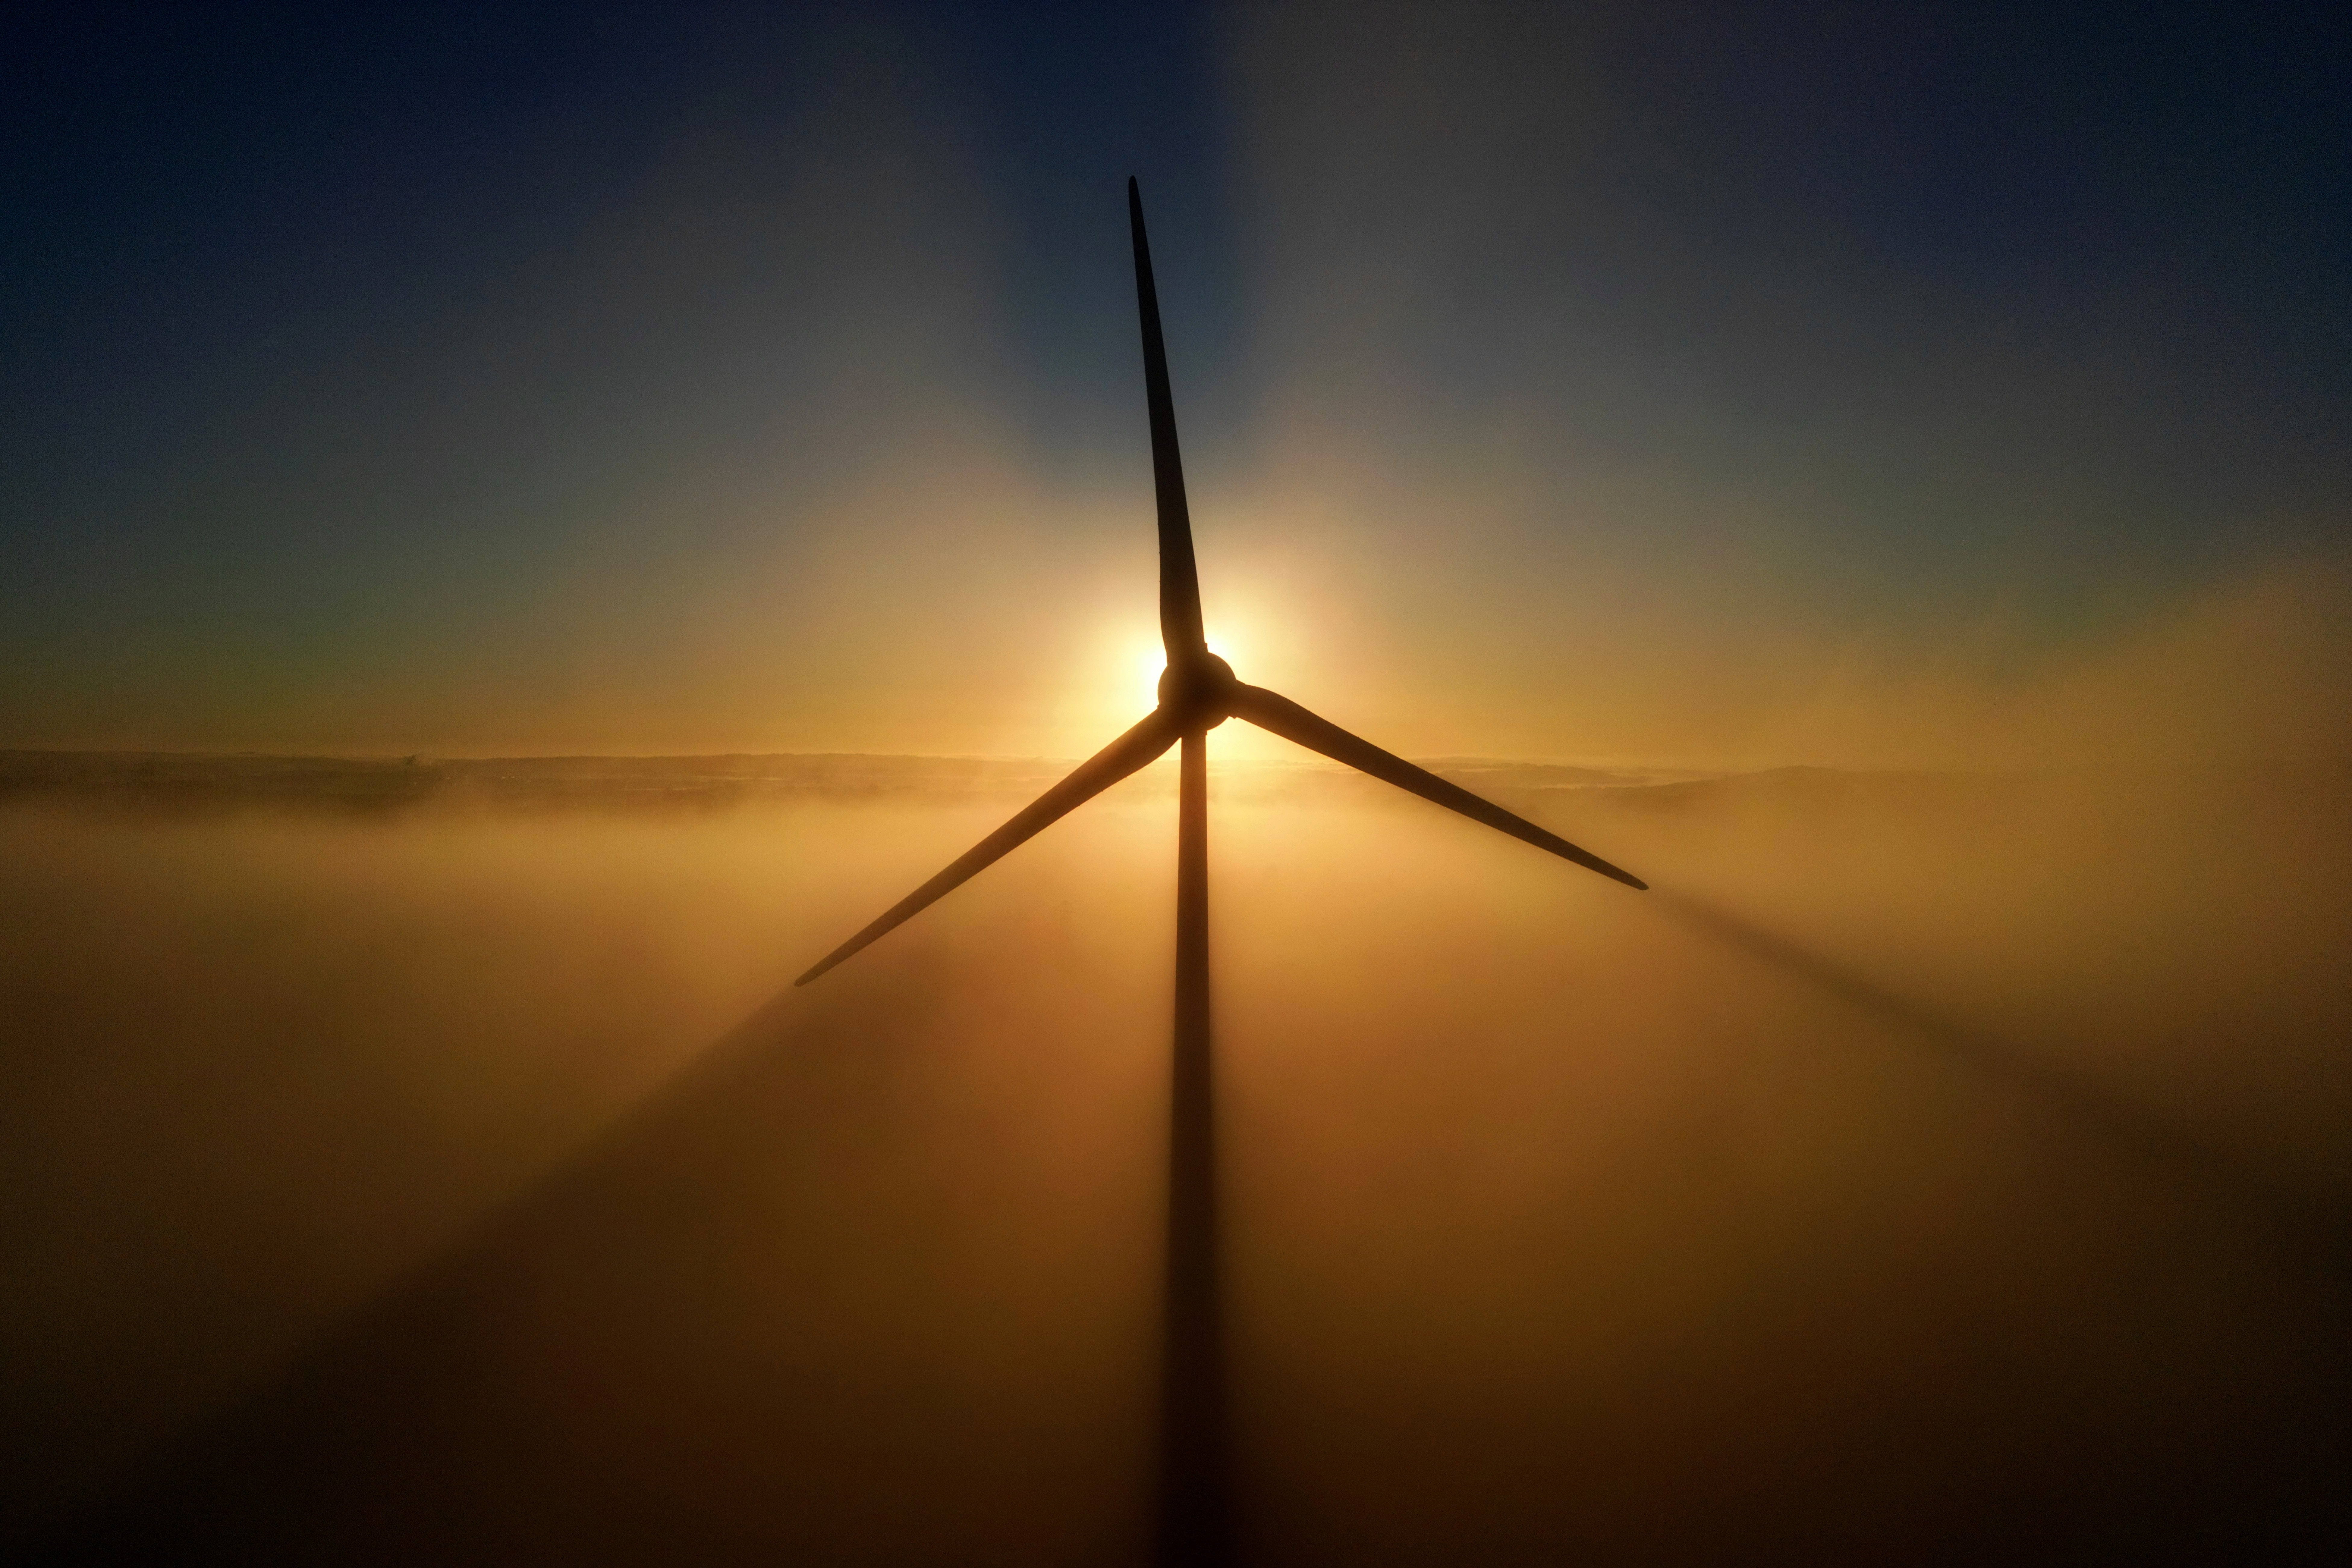 Wind Power Sources Remain More Fantasy than Reality: News: The